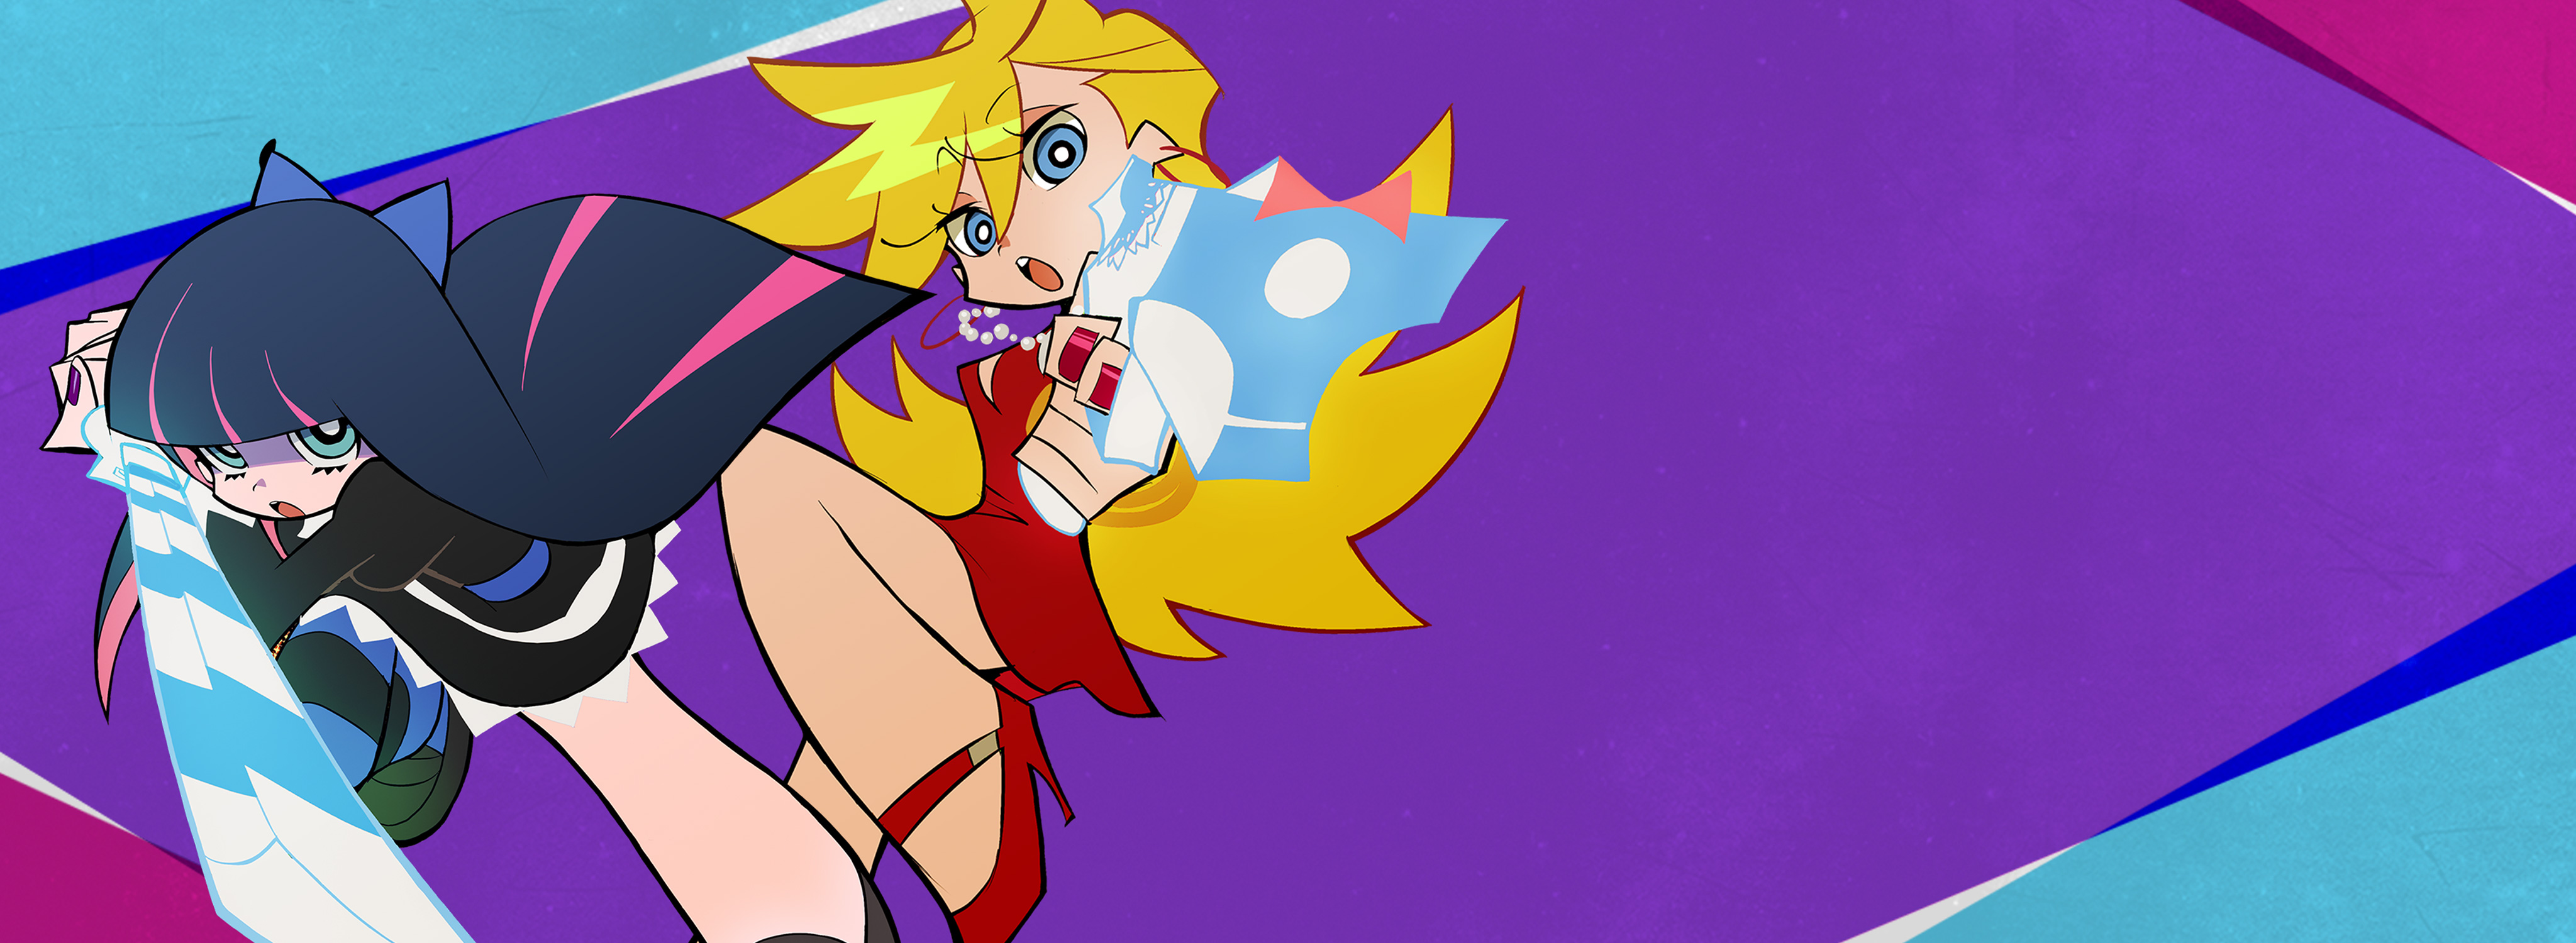 anime, panty & stocking with garterbelt, panty anarchy, stocking anarchy lock screen backgrounds